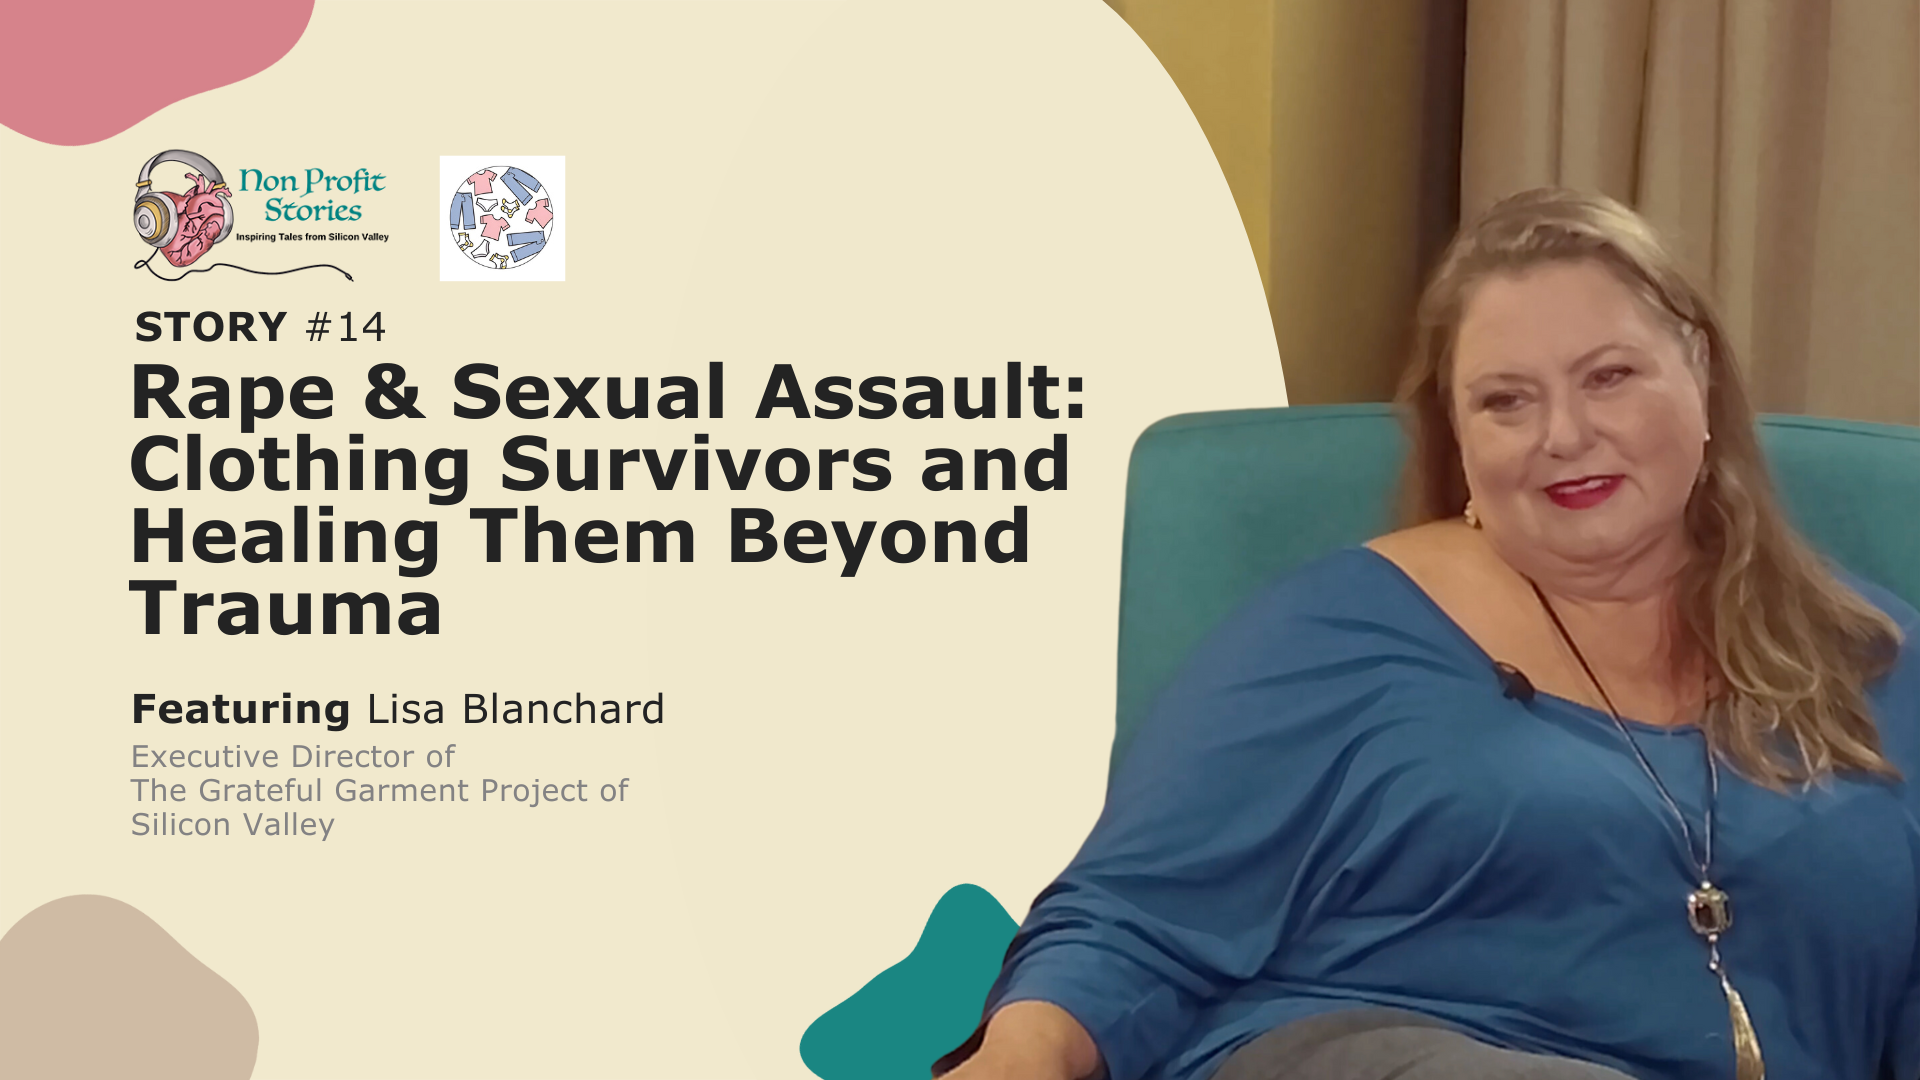 Rape and Sexual Assault: Clothing Survivors and Healing Them Beyond Trauma Video